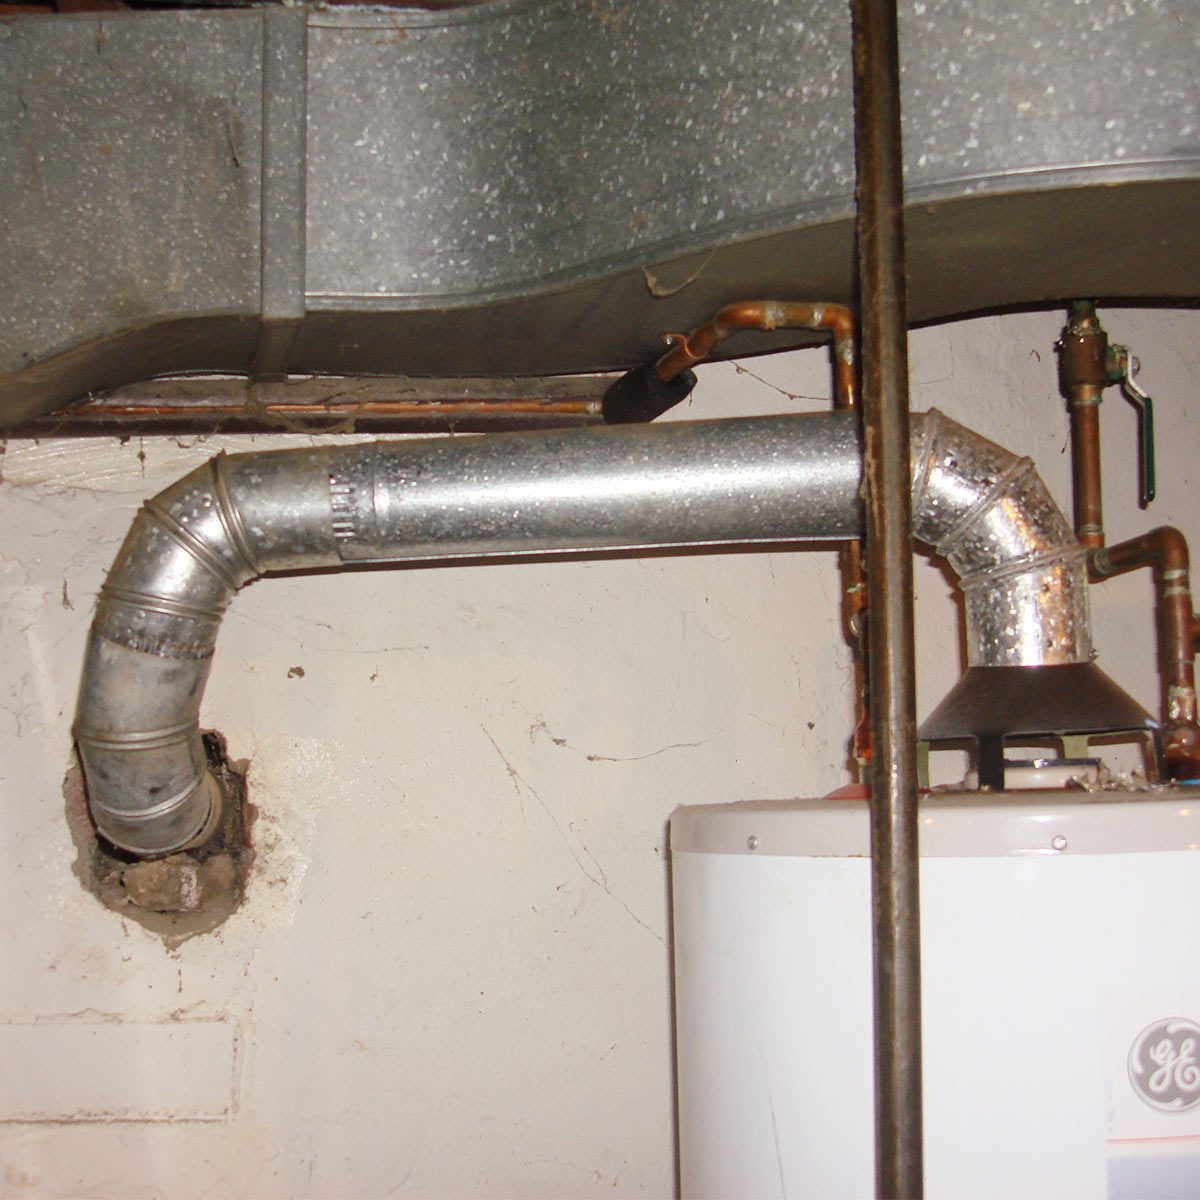 A Water Heater Vent Installed Like This Can Have Lethal Consequences